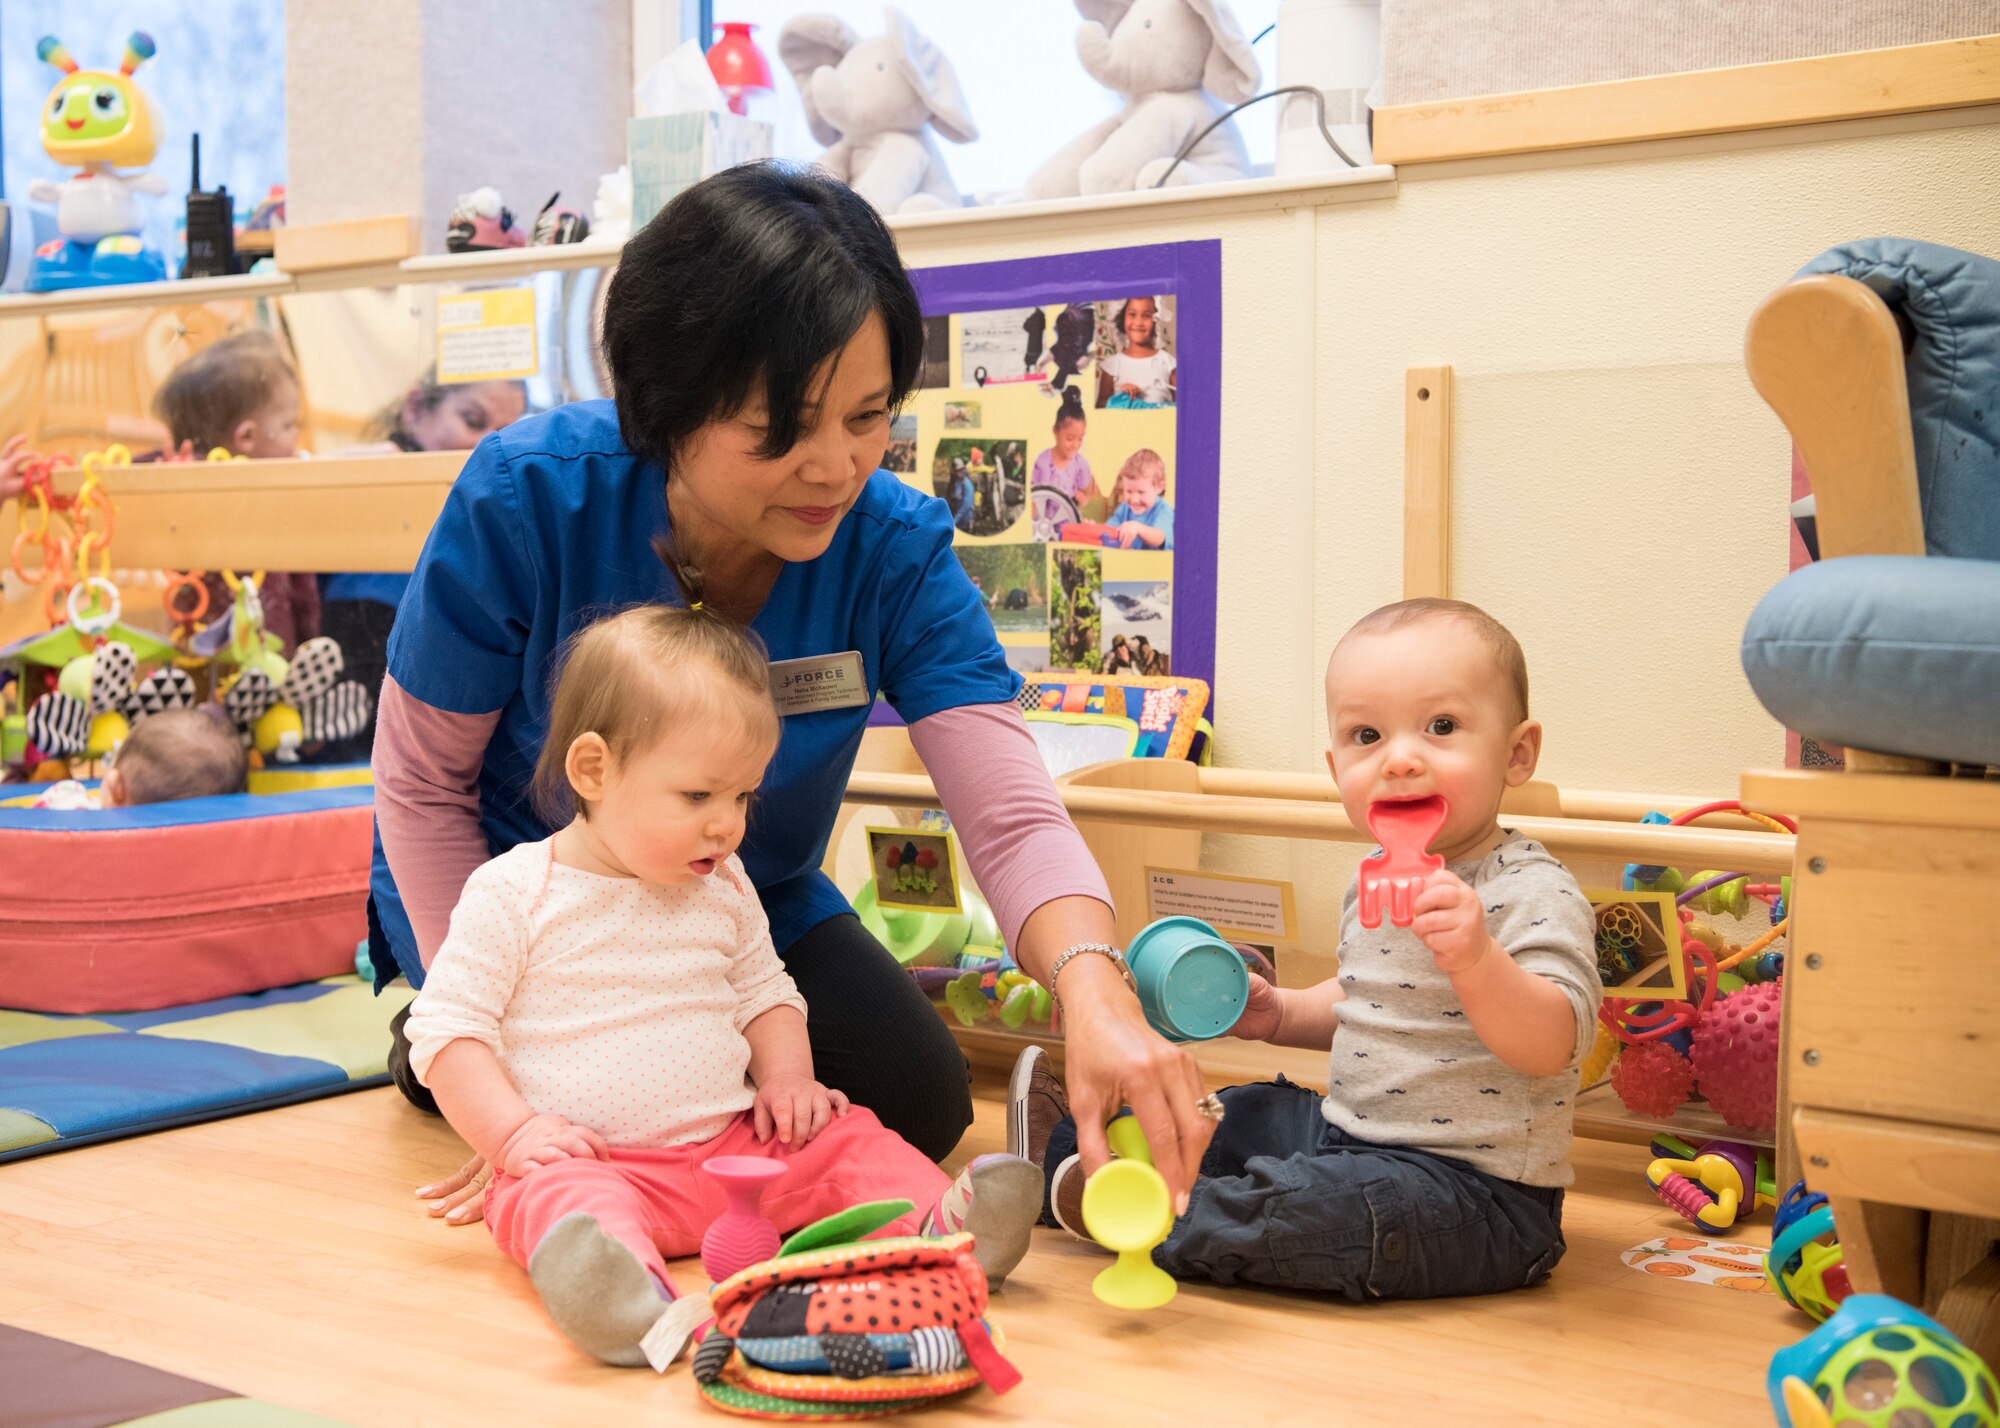 Nelia McKeown, a Sitka Child Development Center child and youth program assistant, gives children toys to play with during playtime at Joint Base Elmendorf-Richardson, Alaska, Dec. 14, 2018. All five JBER CDC centers are accredited by the National Association for the Education of Young Children and provide childcare for ages 6 weeks to 5 years. Due to a shortage in workers JBER is hiring child development center workers – including teachers, cooks and food service workers.